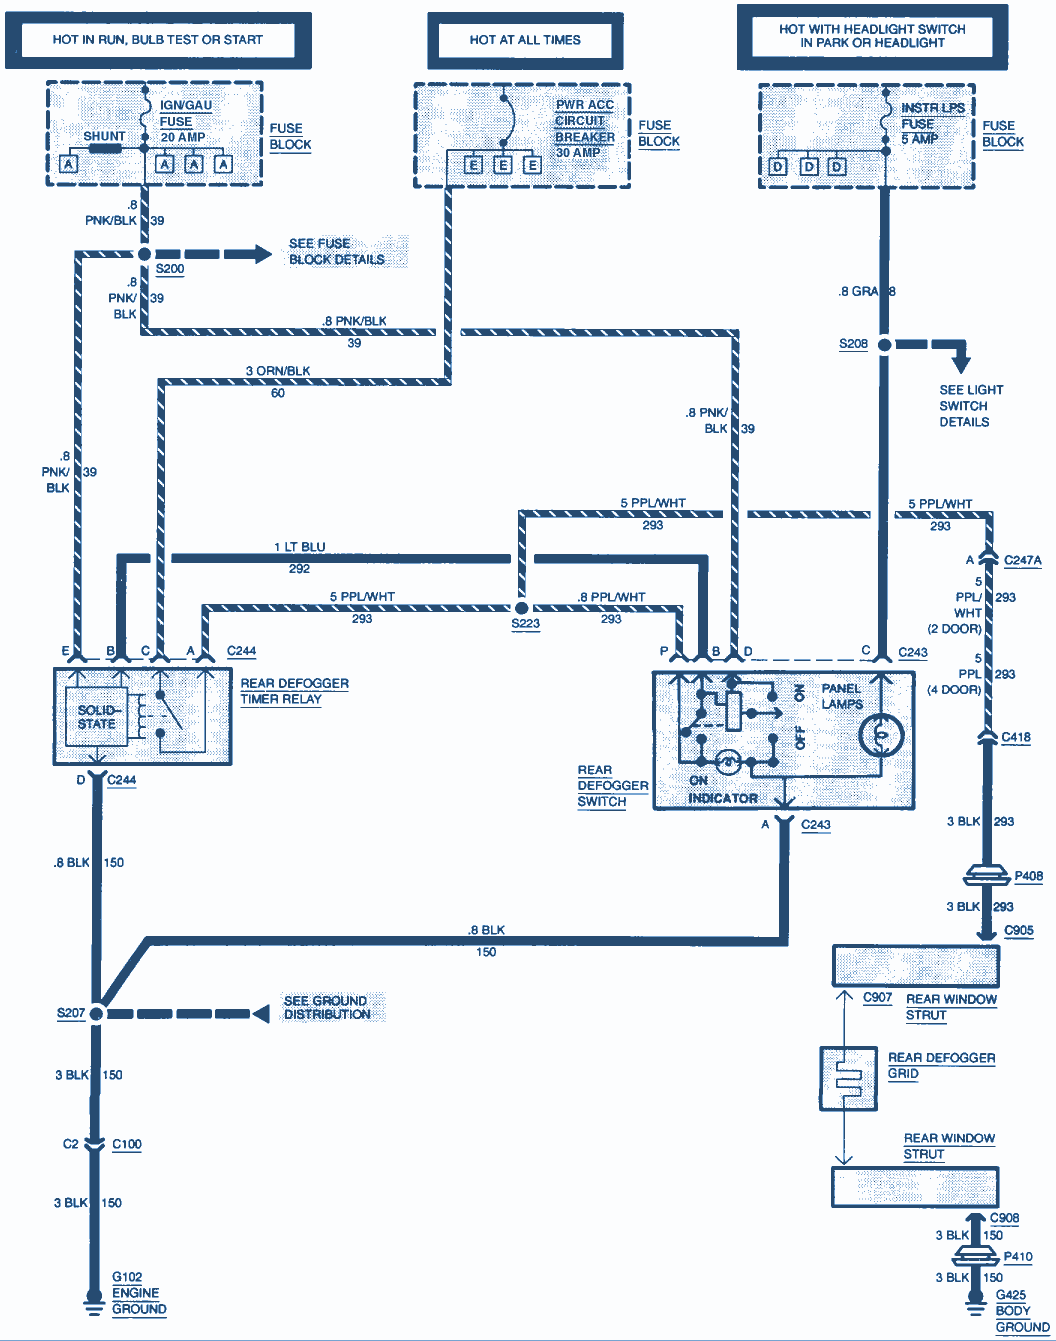 [DIAGRAM] 1996 Chevy S10 Pick Up Wiring Diagram FULL Version HD Quality